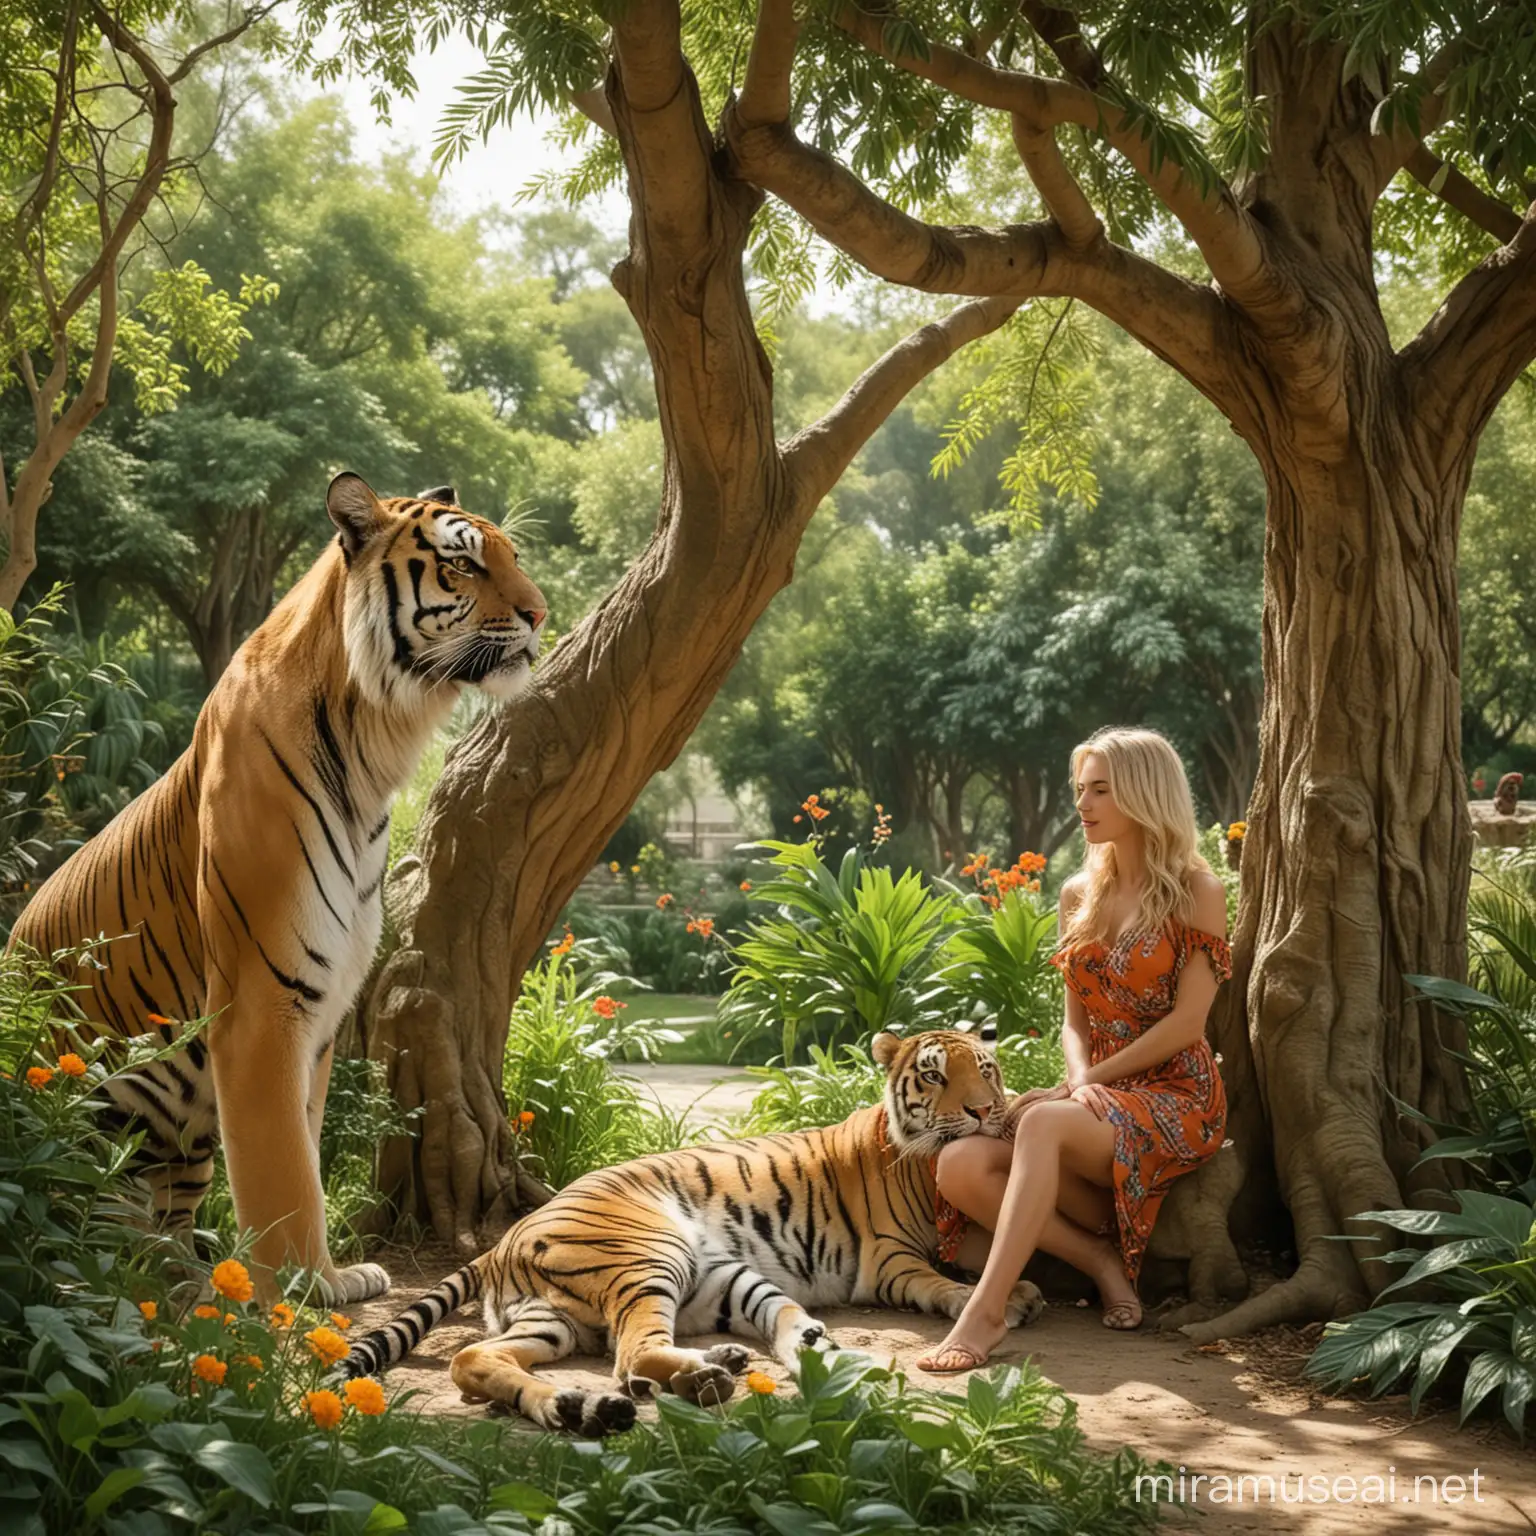 Garden of the Landscape Eden landscape with a Beautiful blonde woman under a tree, with a tiger